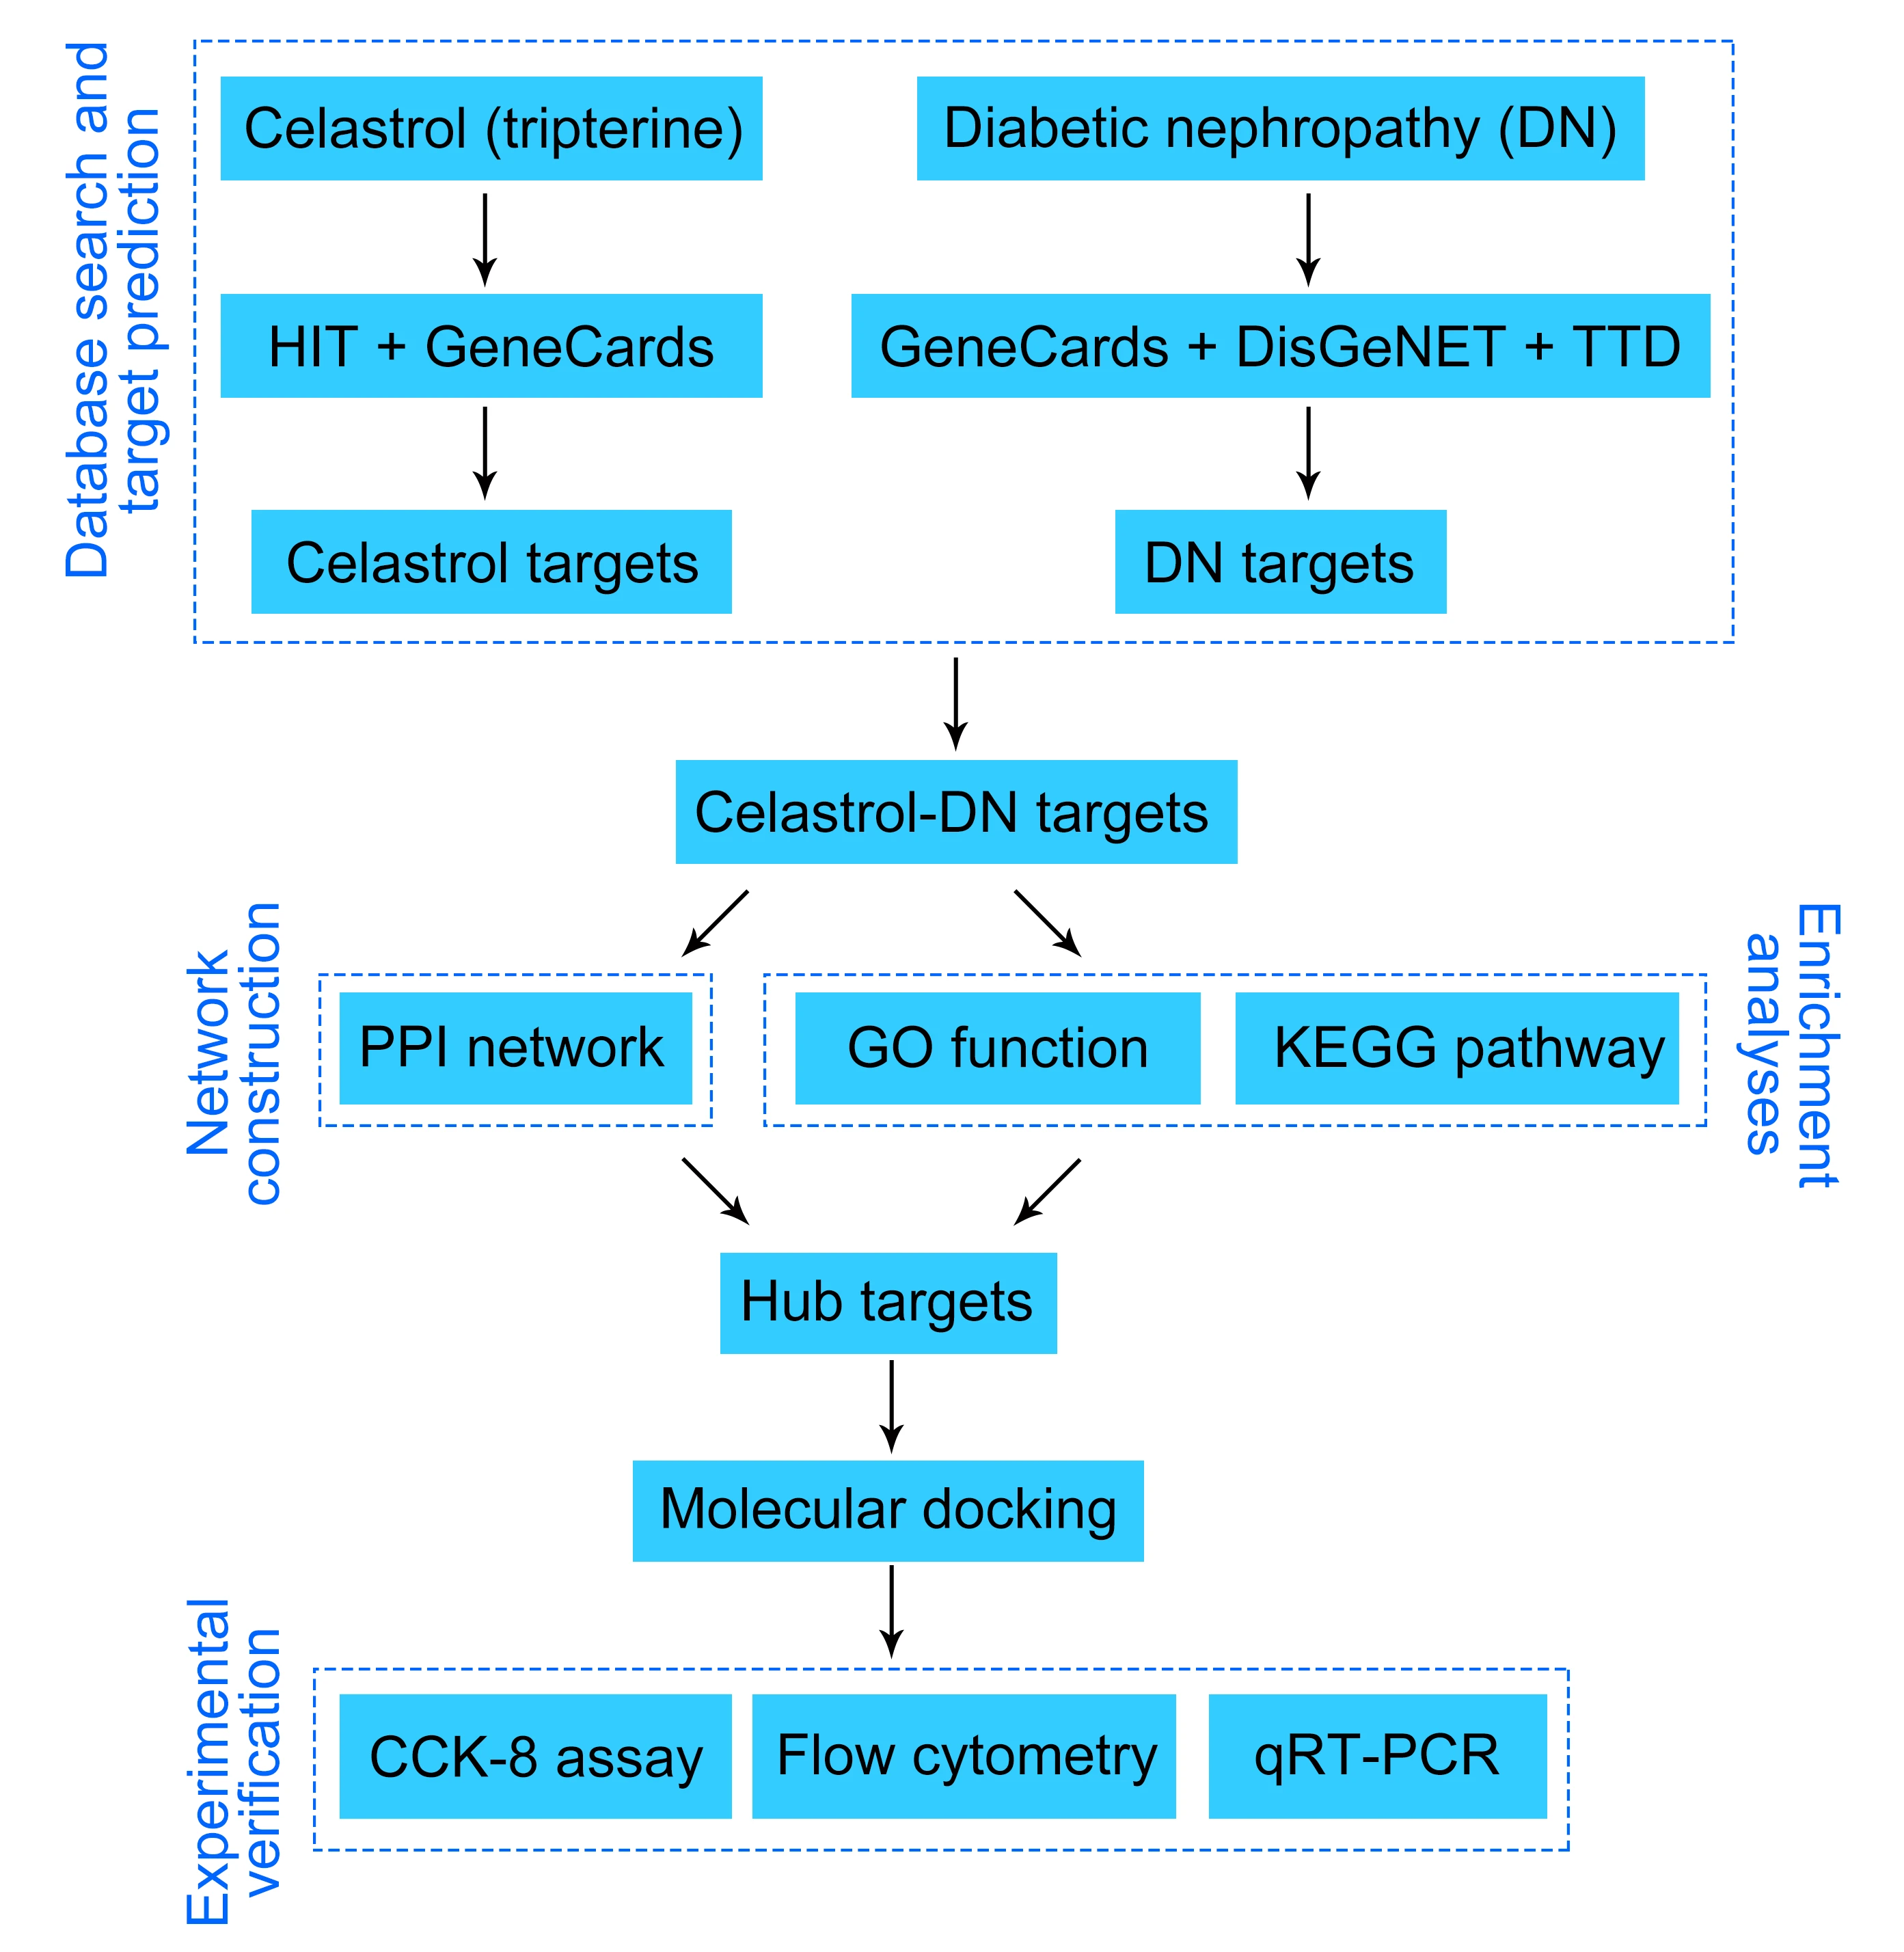 Study of molecular mechanisms underlying the medicinal plant <i>Tripterygium wilfordii</i>-derived compound celastrol in treating diabetic nephropathy based on network pharmacology and molecular docking